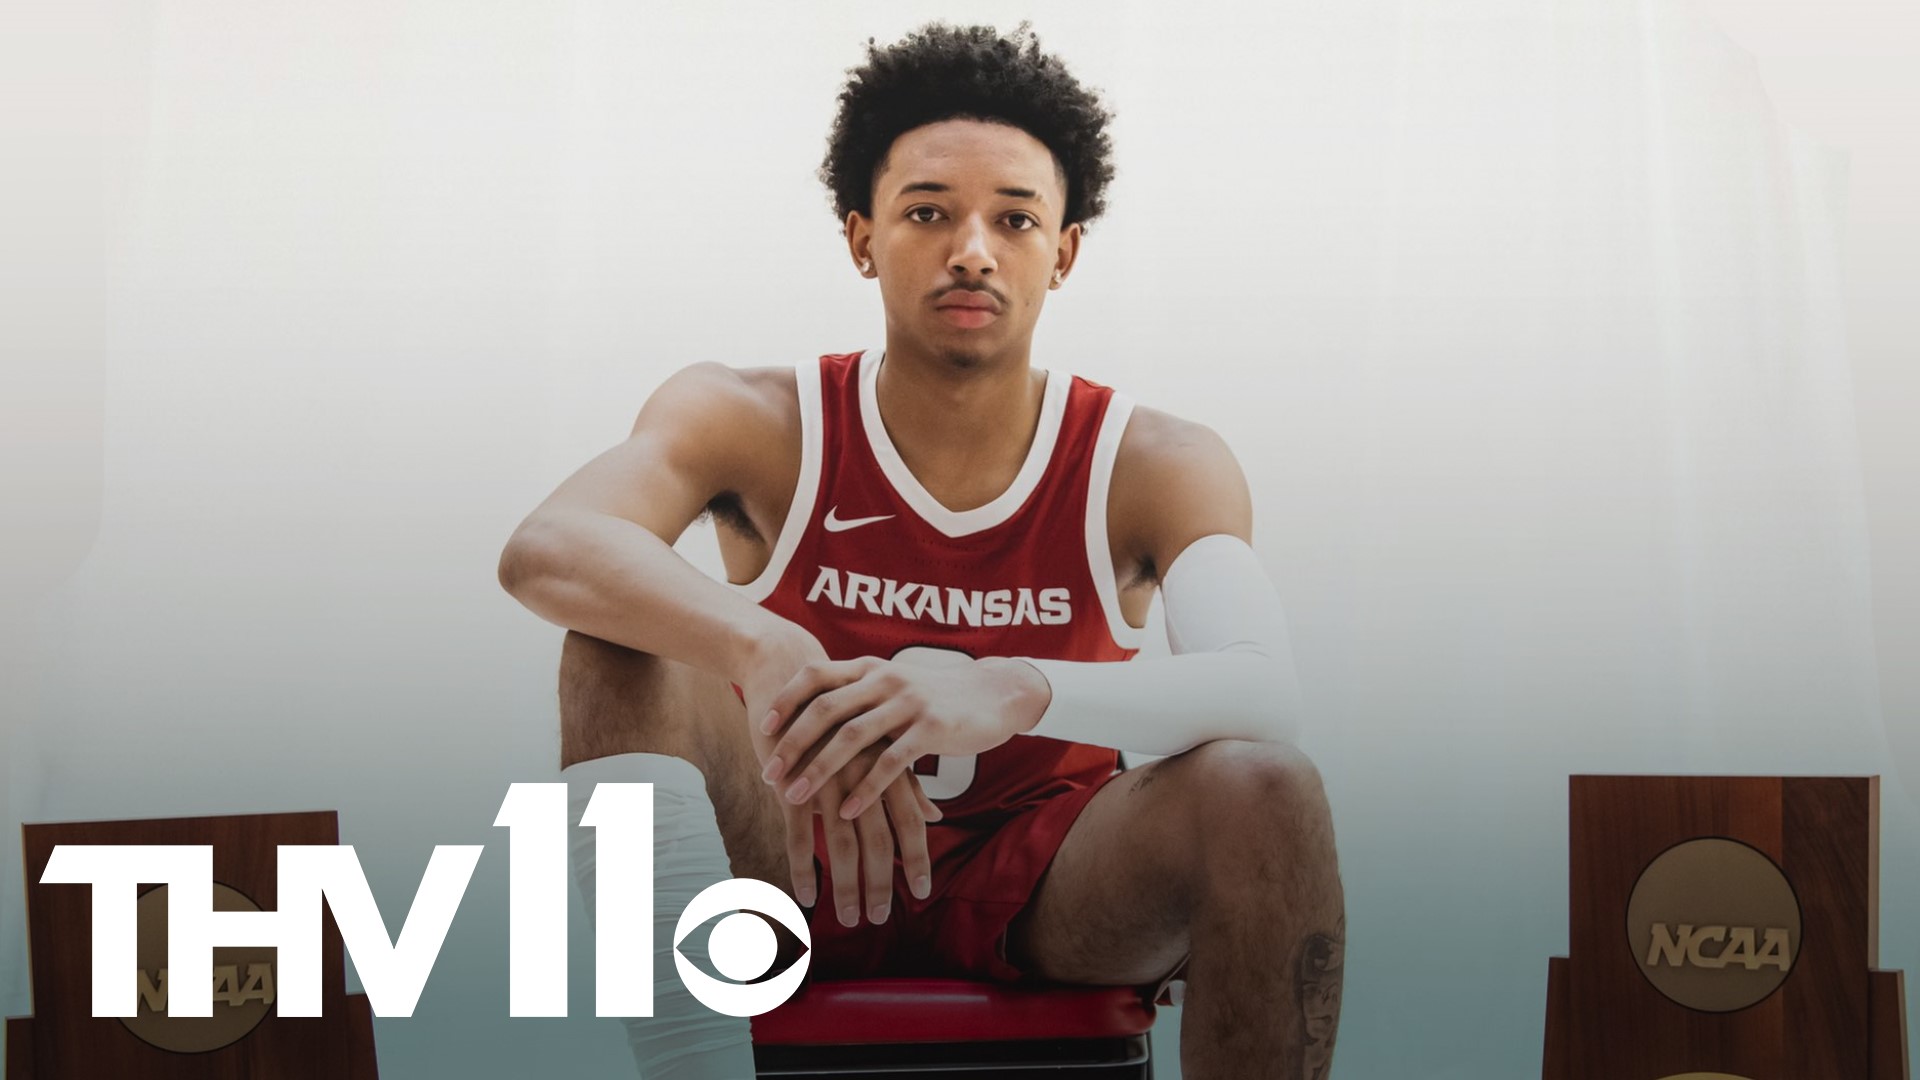 Nick Smith Jr., a five-star commit to the Arkansas Razorbacks basketball team, is now allowed to play his senior year season at North Little Rock High School.